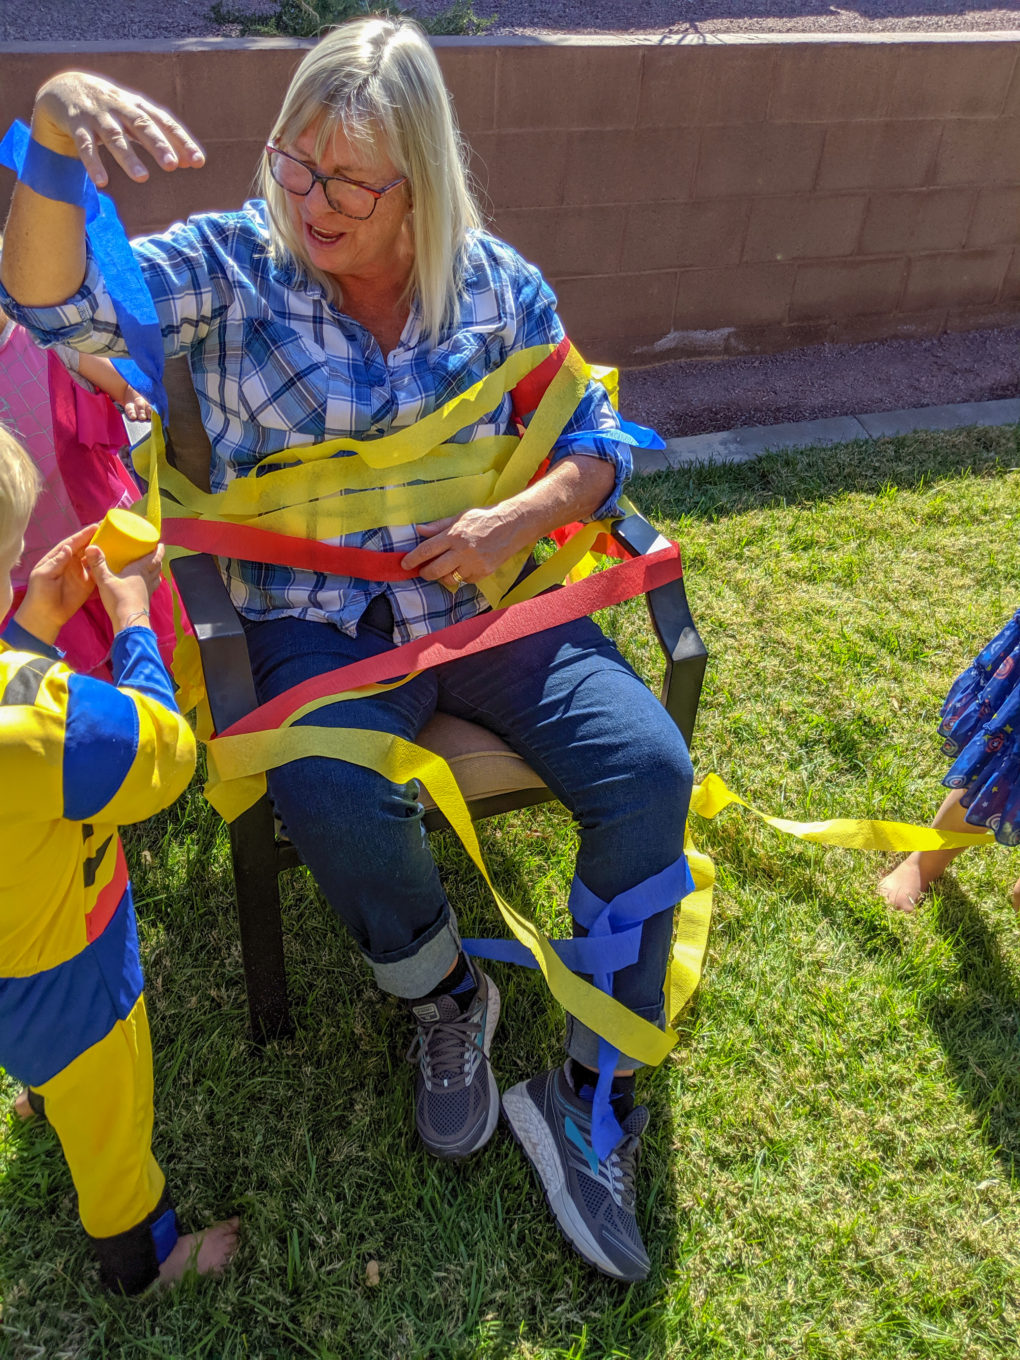 Superhero party activity - tie up the villains with streamers